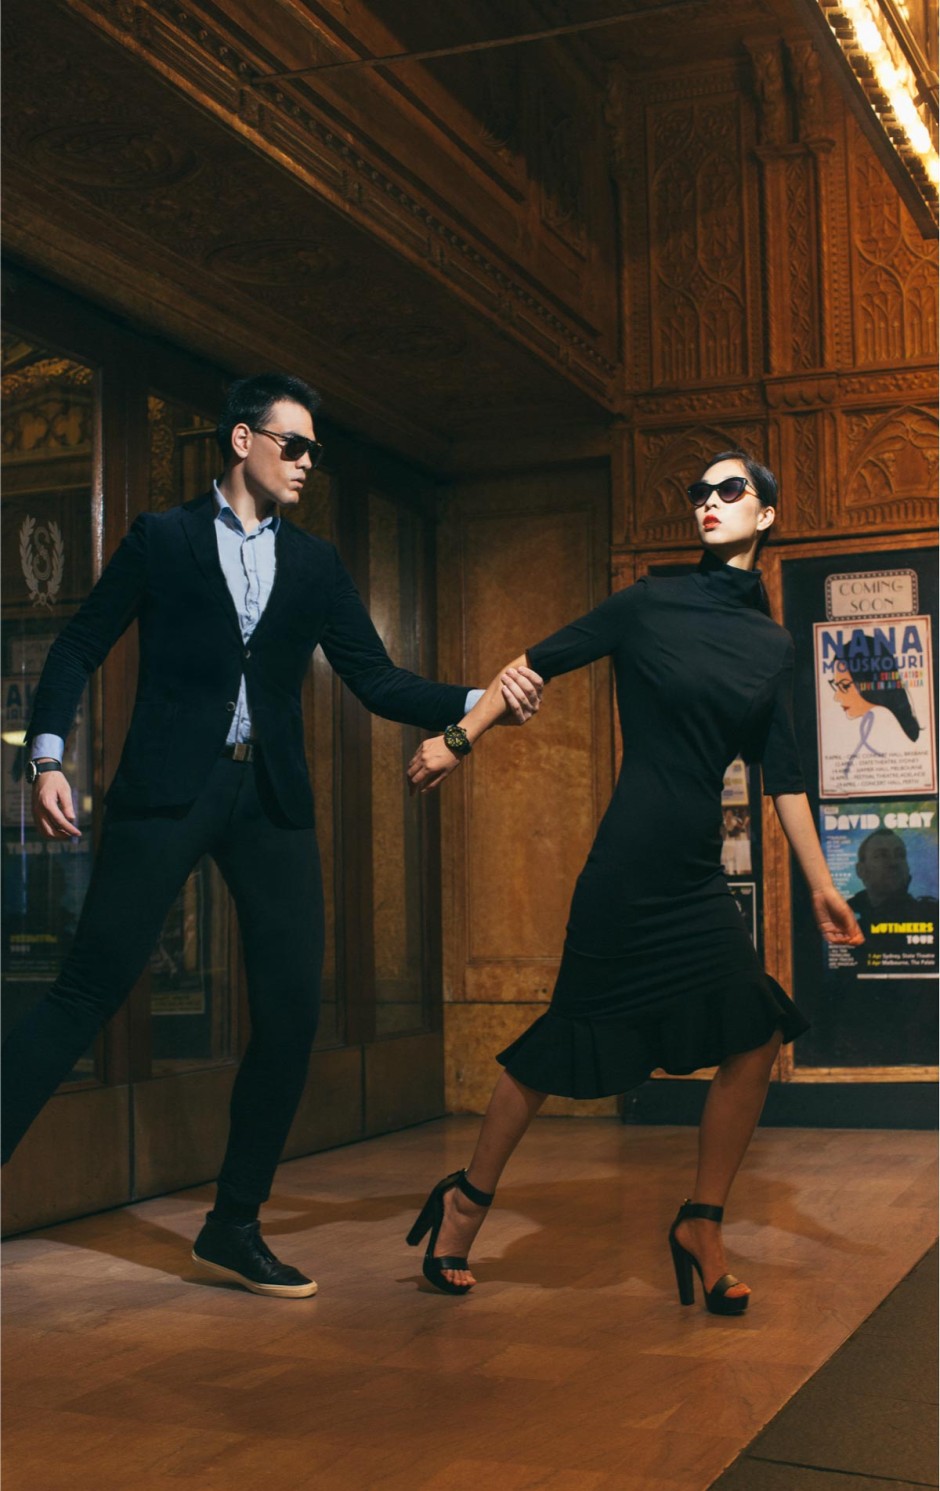 A male and female model walking through the State theatre in elegant clothing